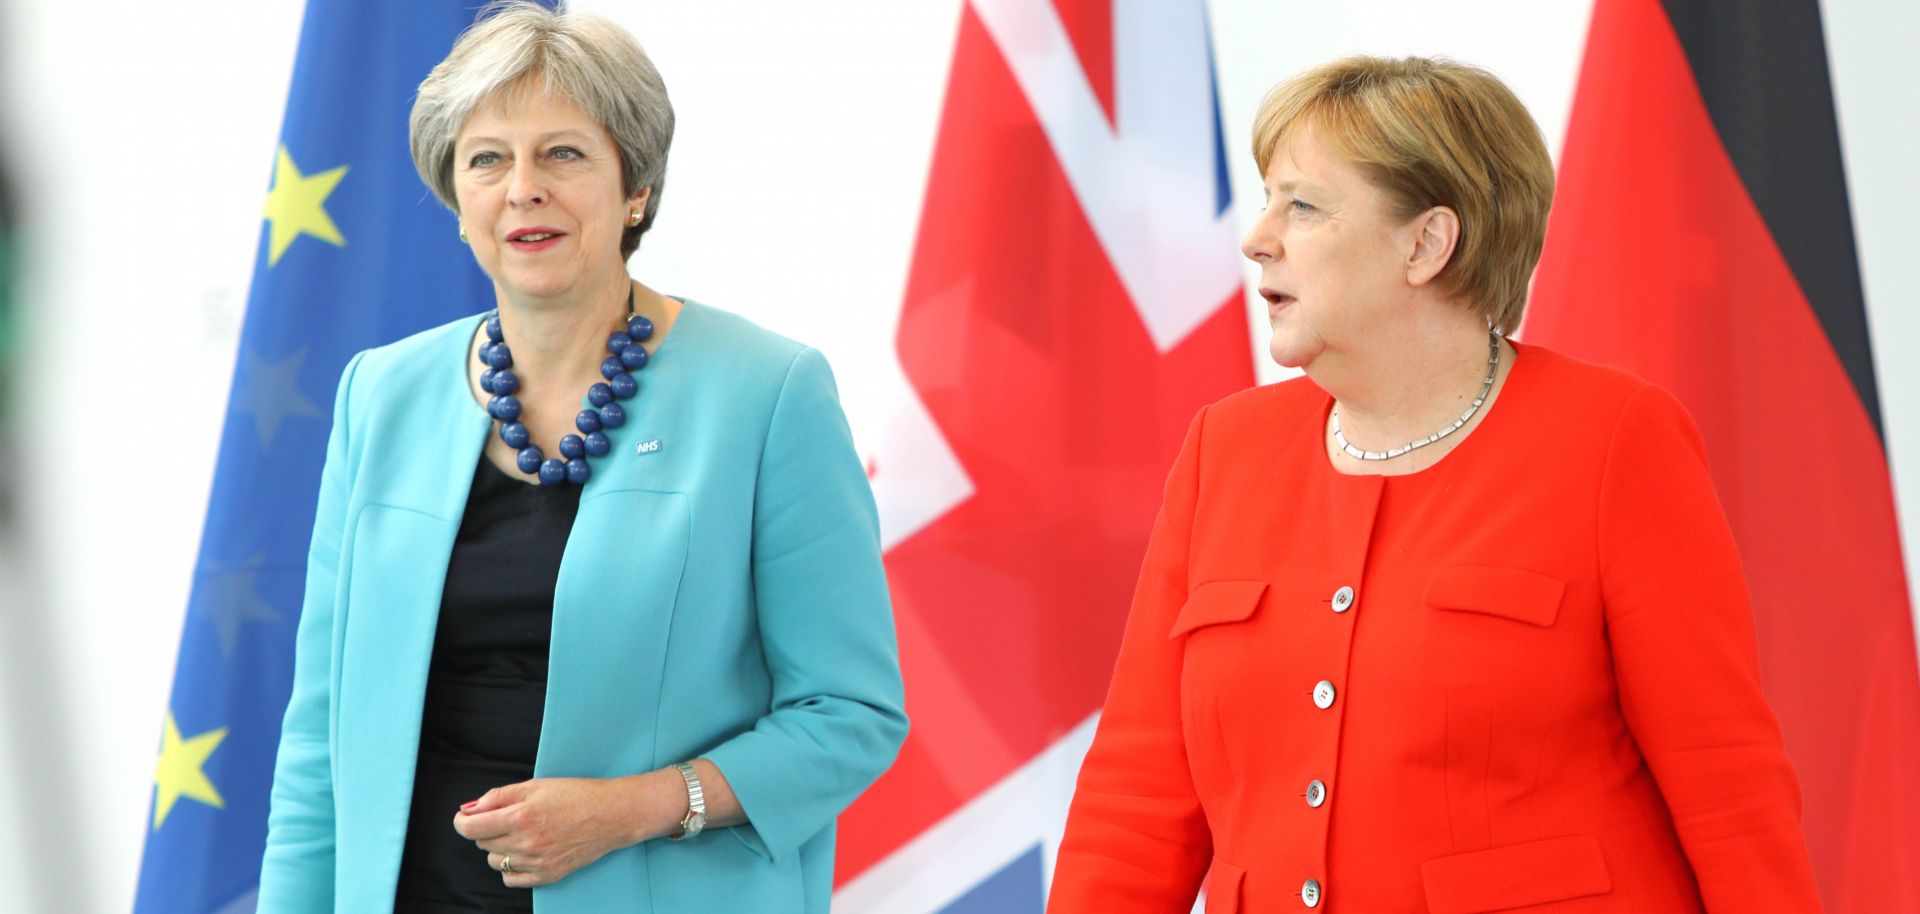 British Prime Minister Theresa May (left) and German Chancellor Angela Merkel meet for Brexit talks in Berlin during July 2018.